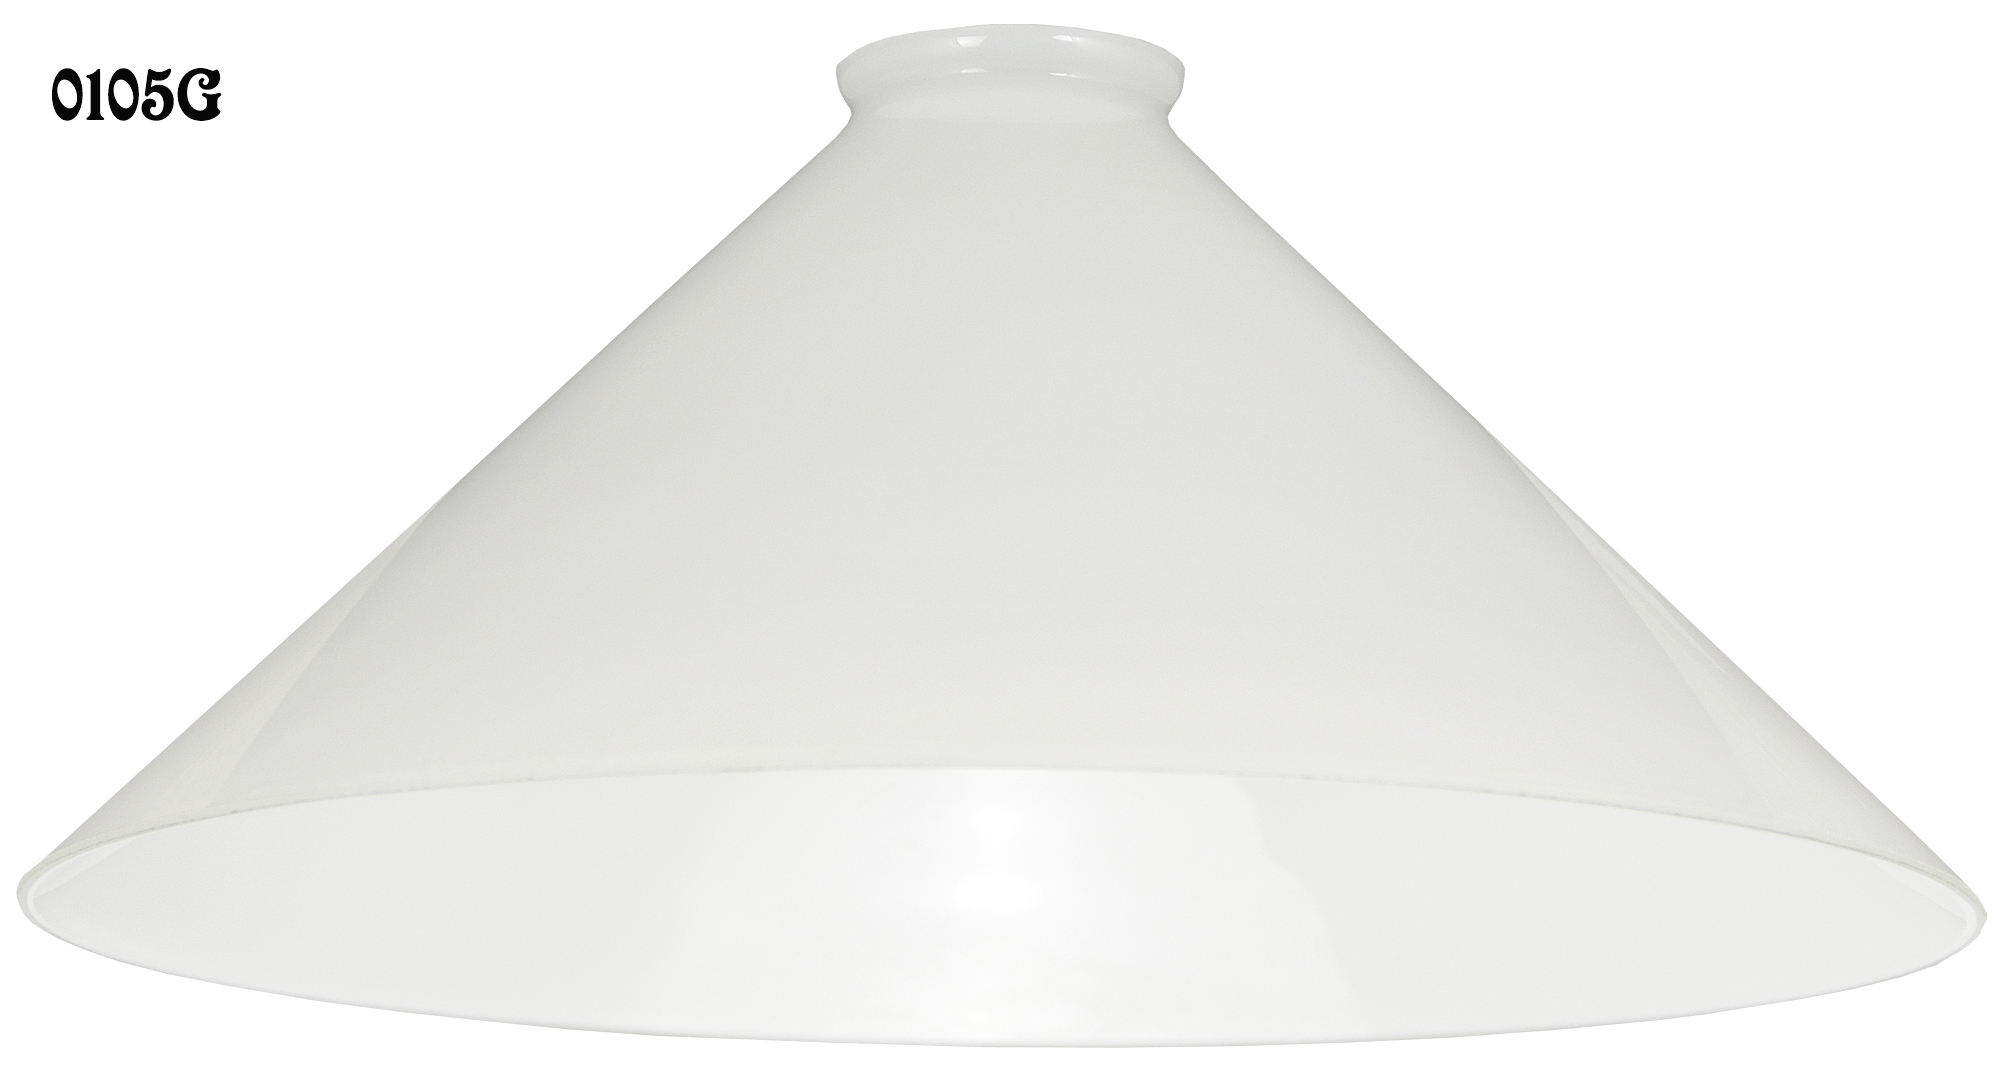 https://www.vintagehardware.com/prodimages/0105G-b__Opal-Glass-Cone-Shade-12-Inches-2.25-Inch-Fitter.jpg